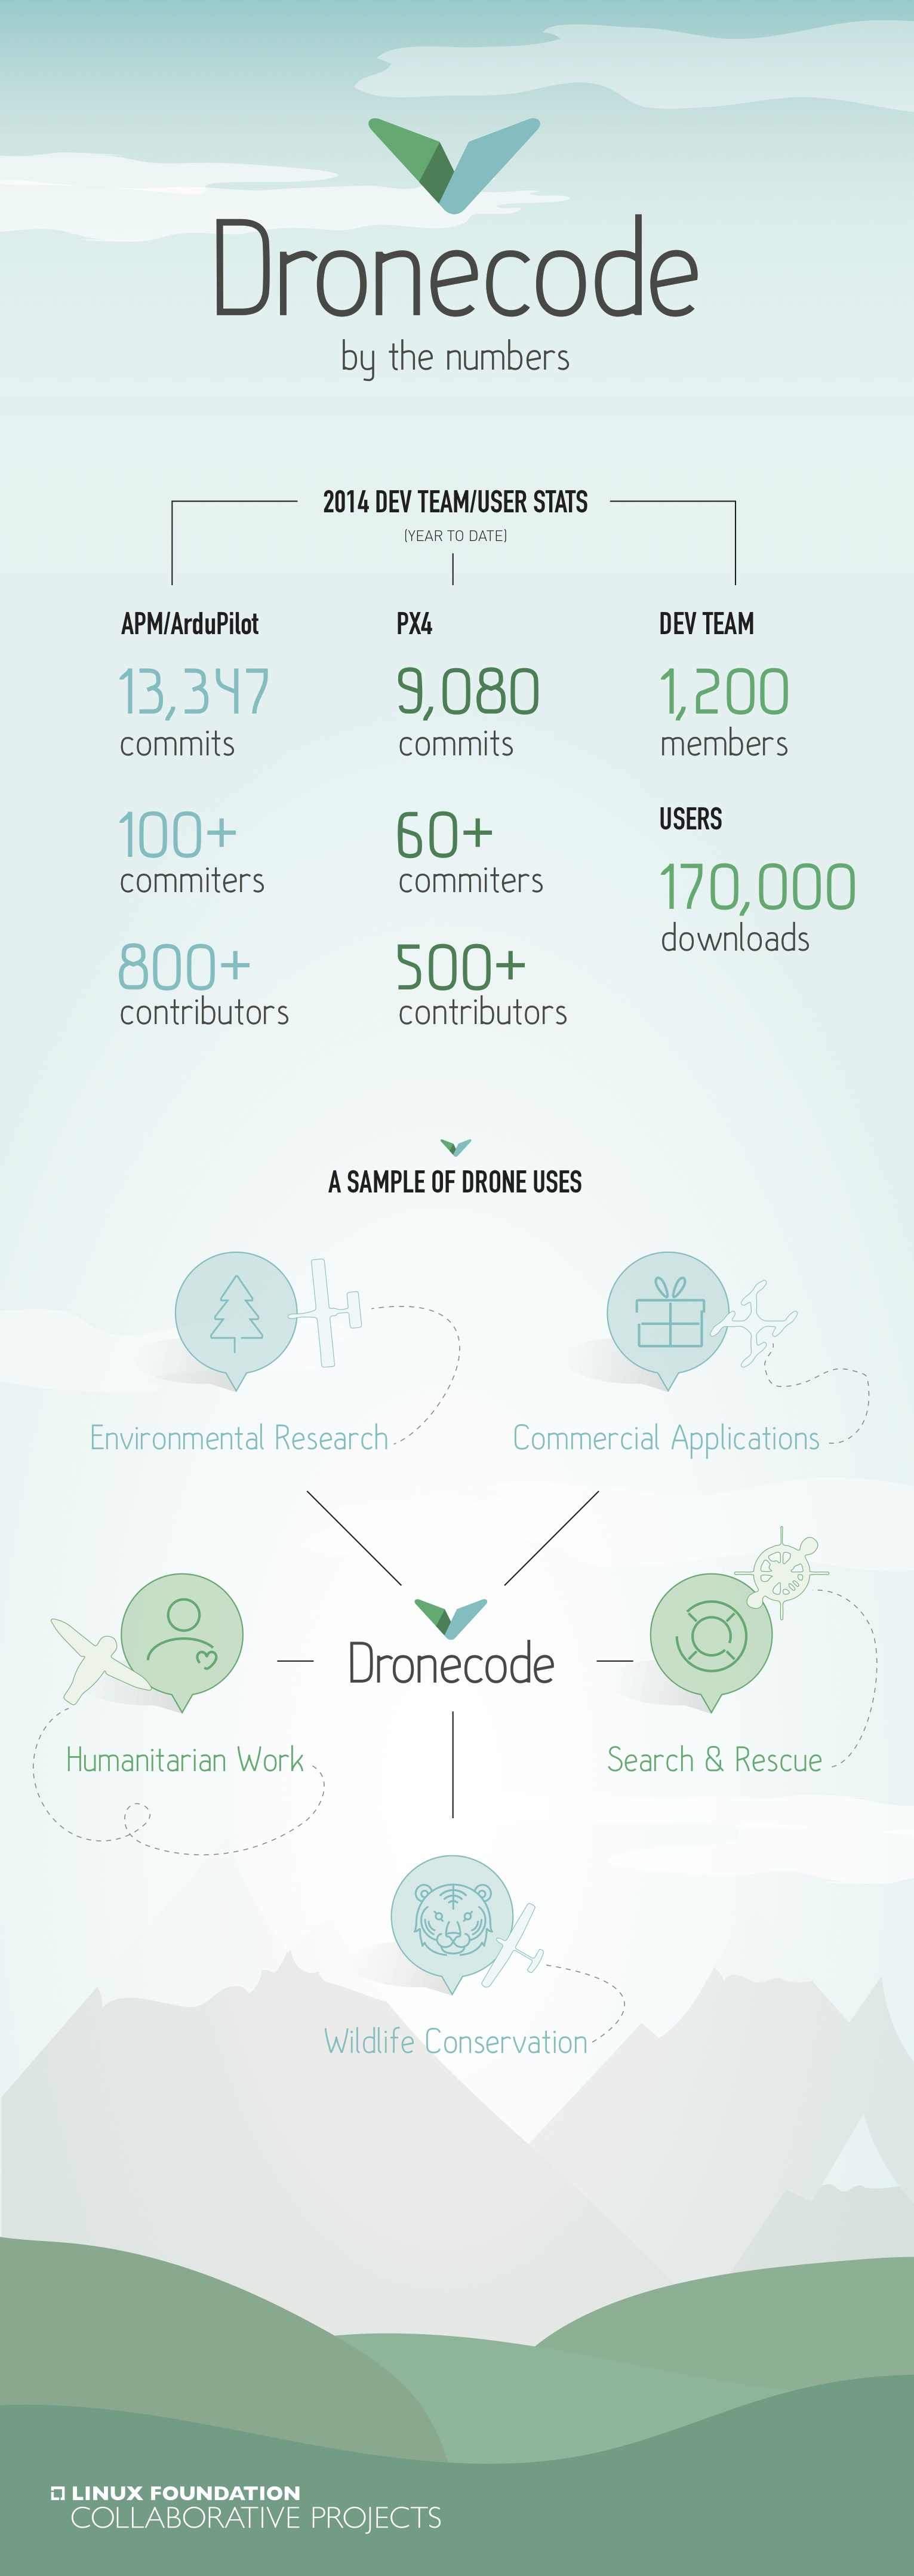 Dronecode Infographic Final